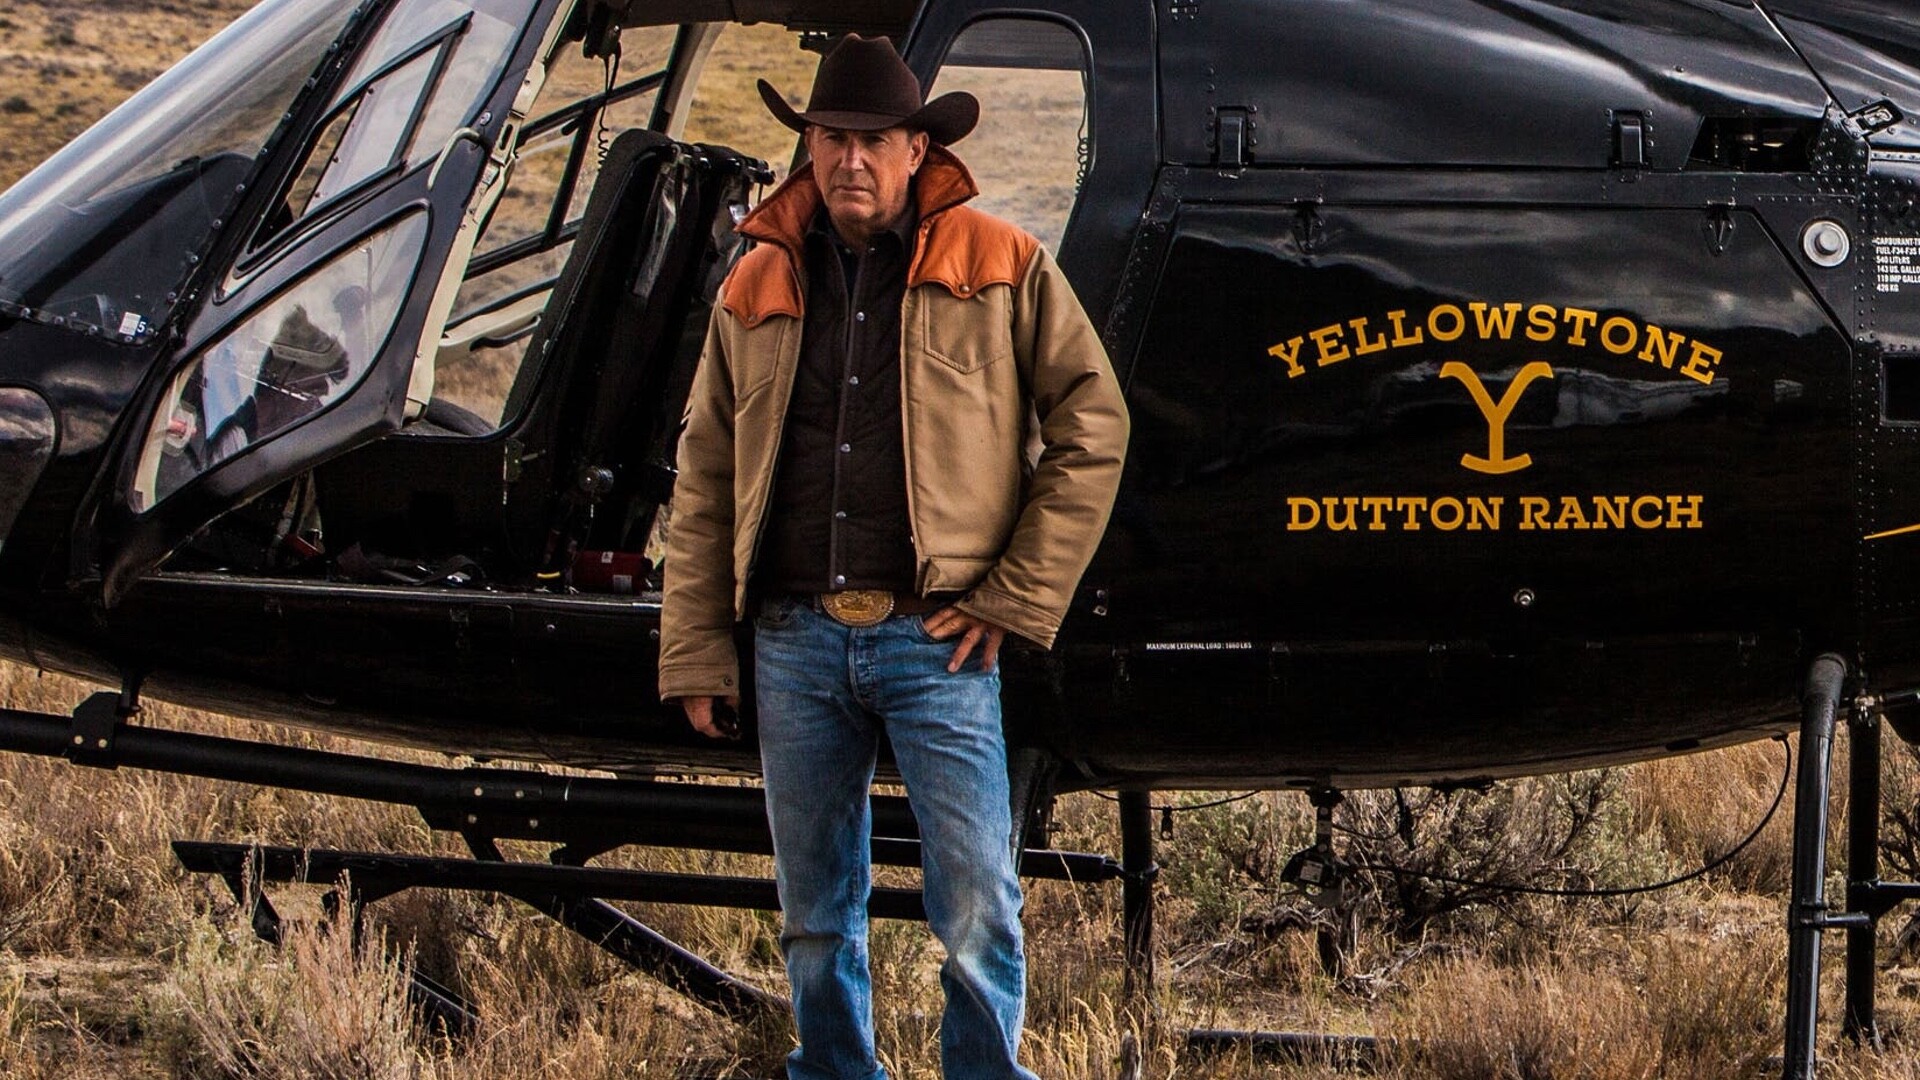 Yellowstone (TV Series): Kevin Costner, Ranch owned by seven generations. 1920x1080 Full HD Wallpaper.